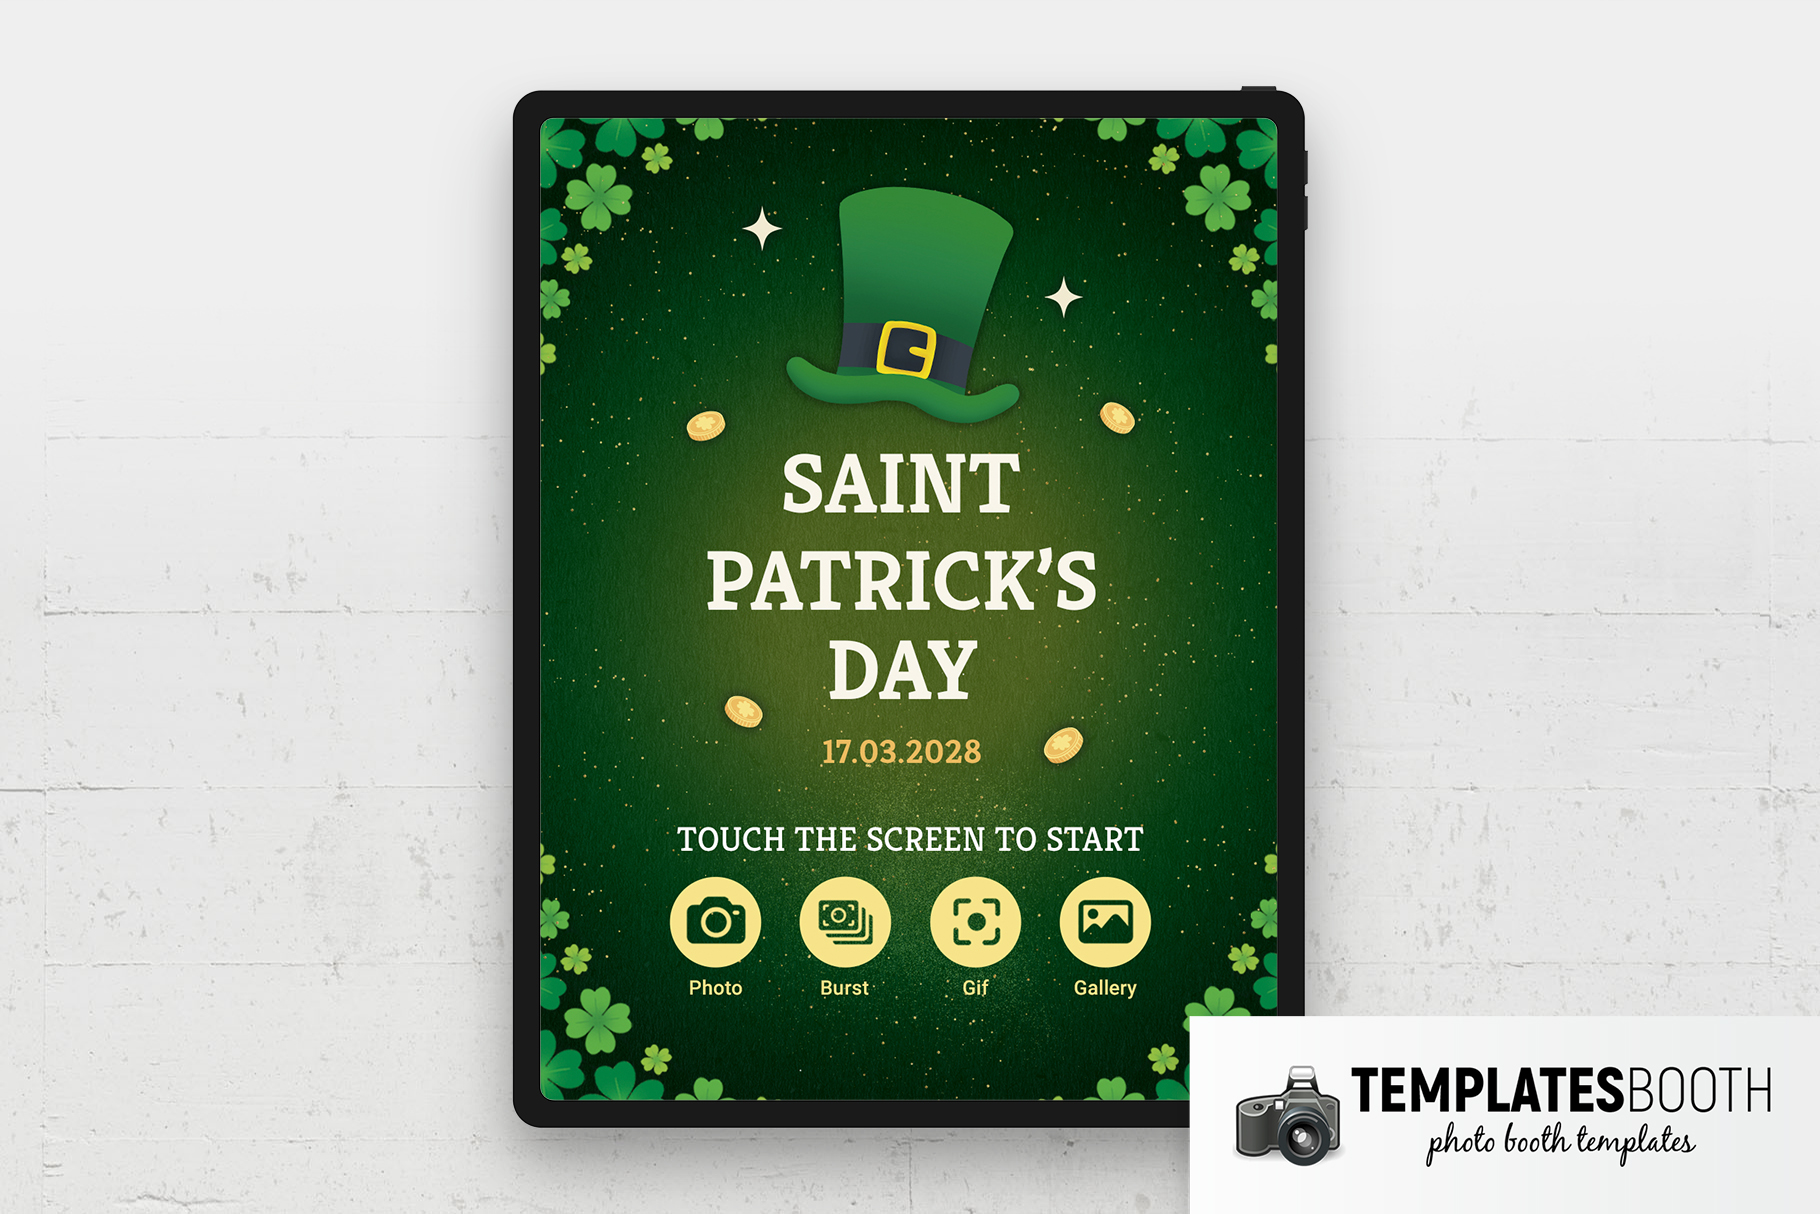 St. Patrick Day Photo Booth Welcome Screen